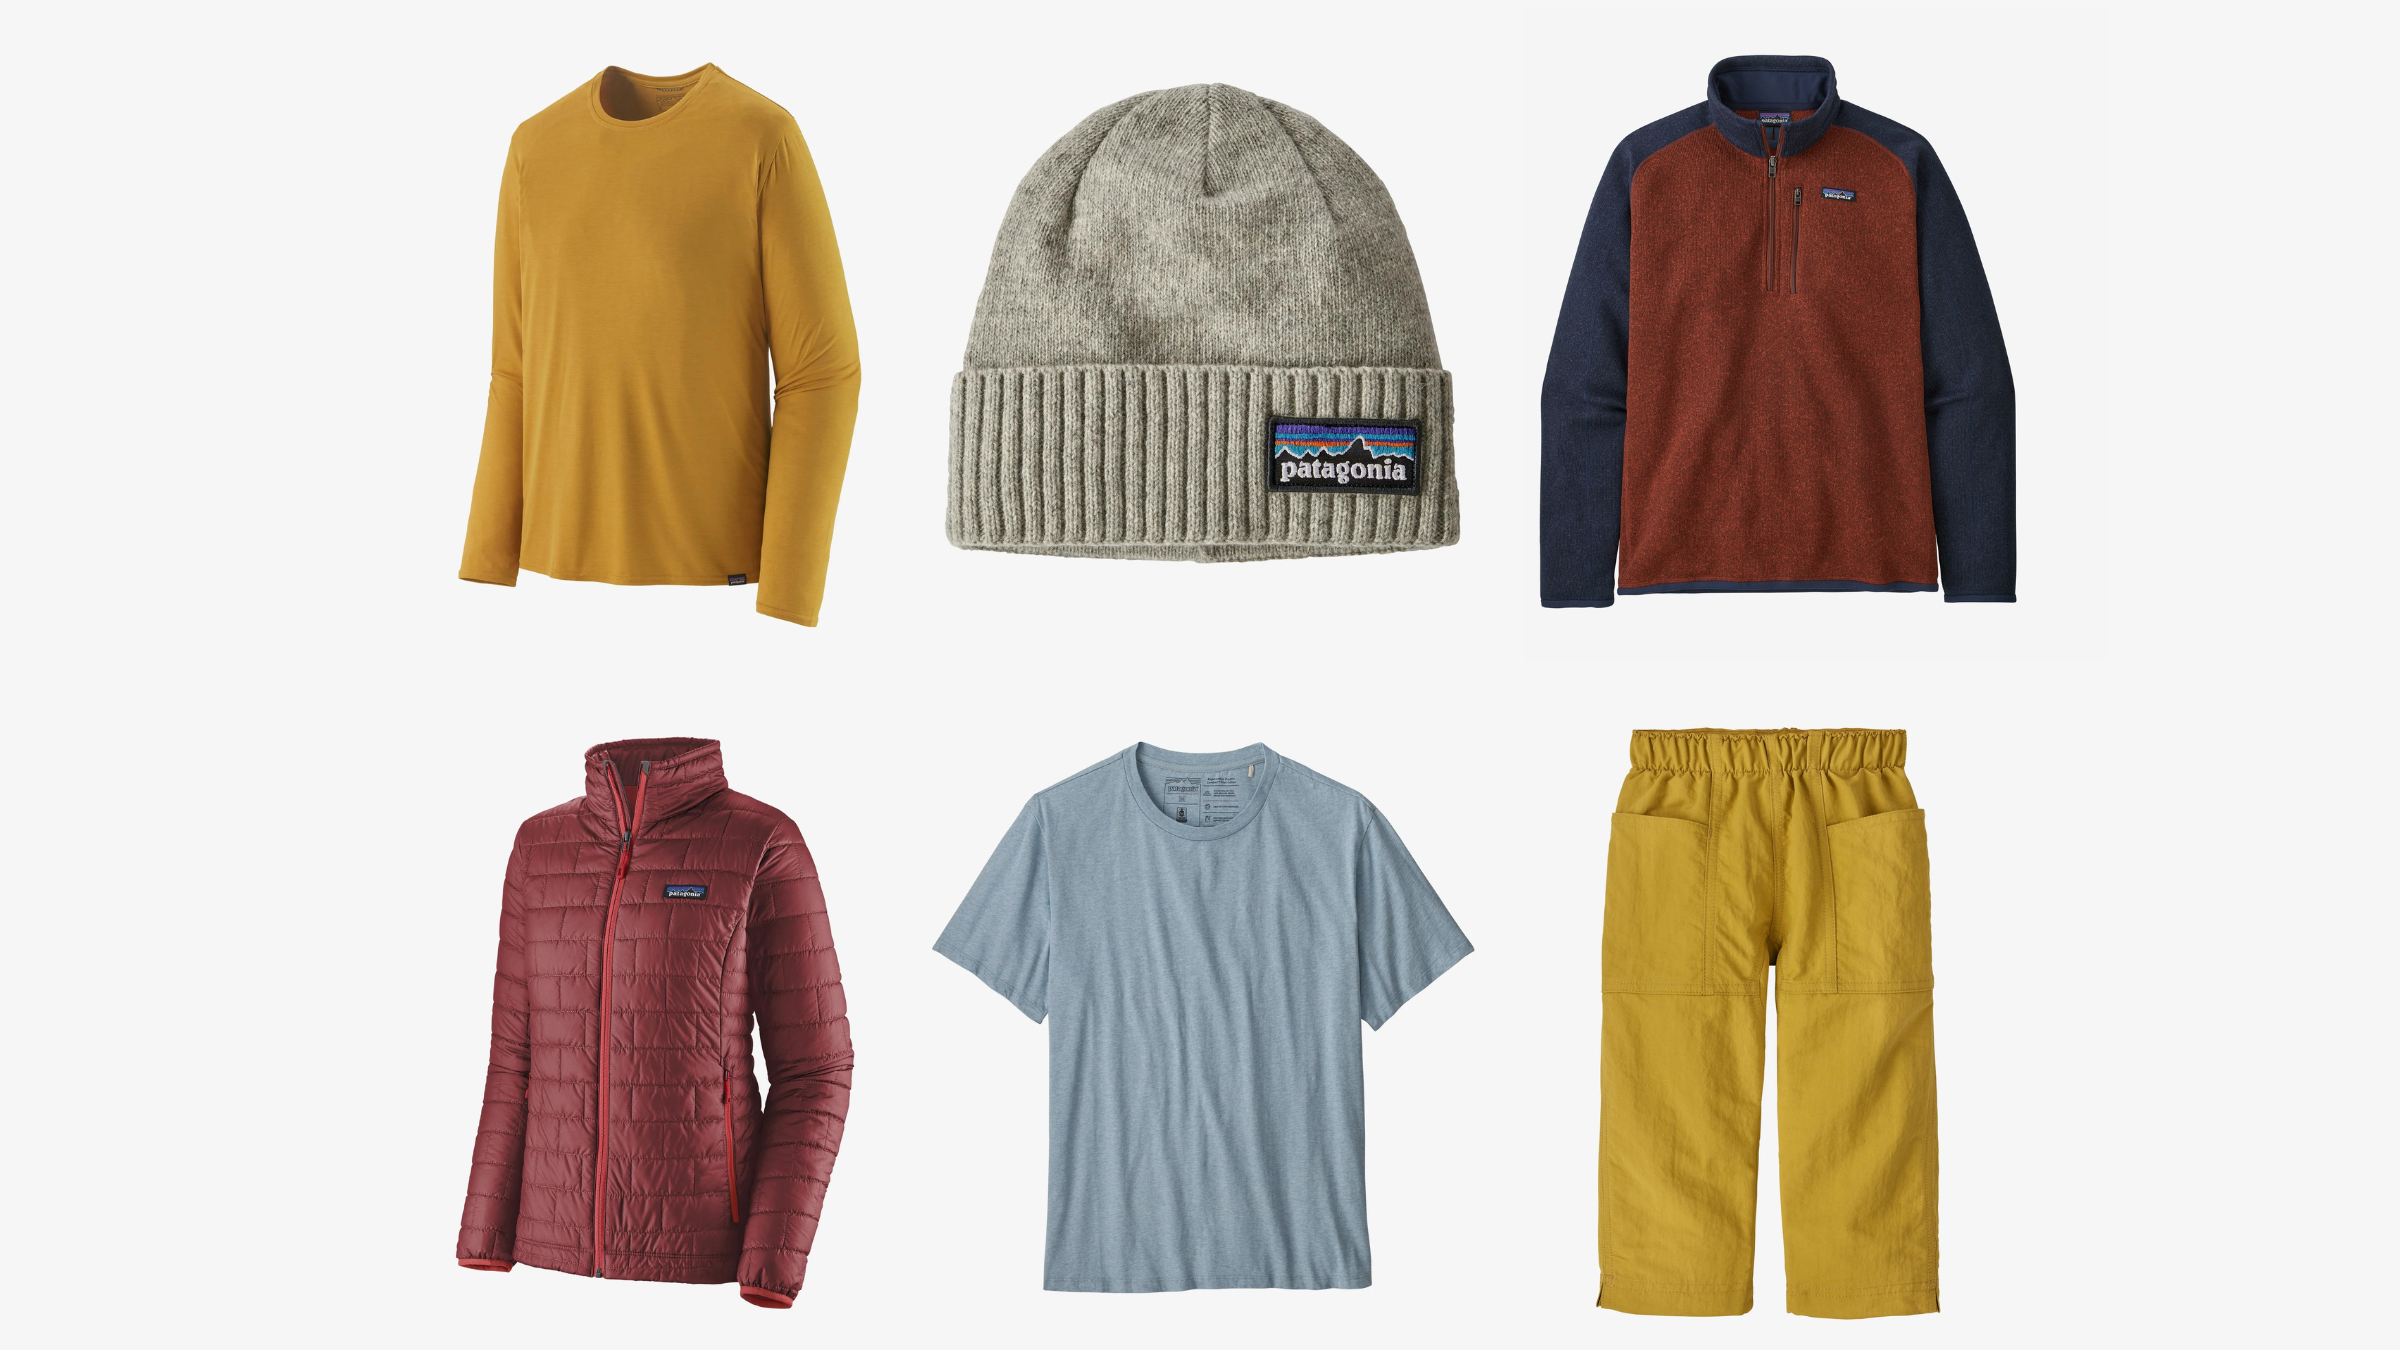 Some of Patagonia's Best Apparel Is on Sale